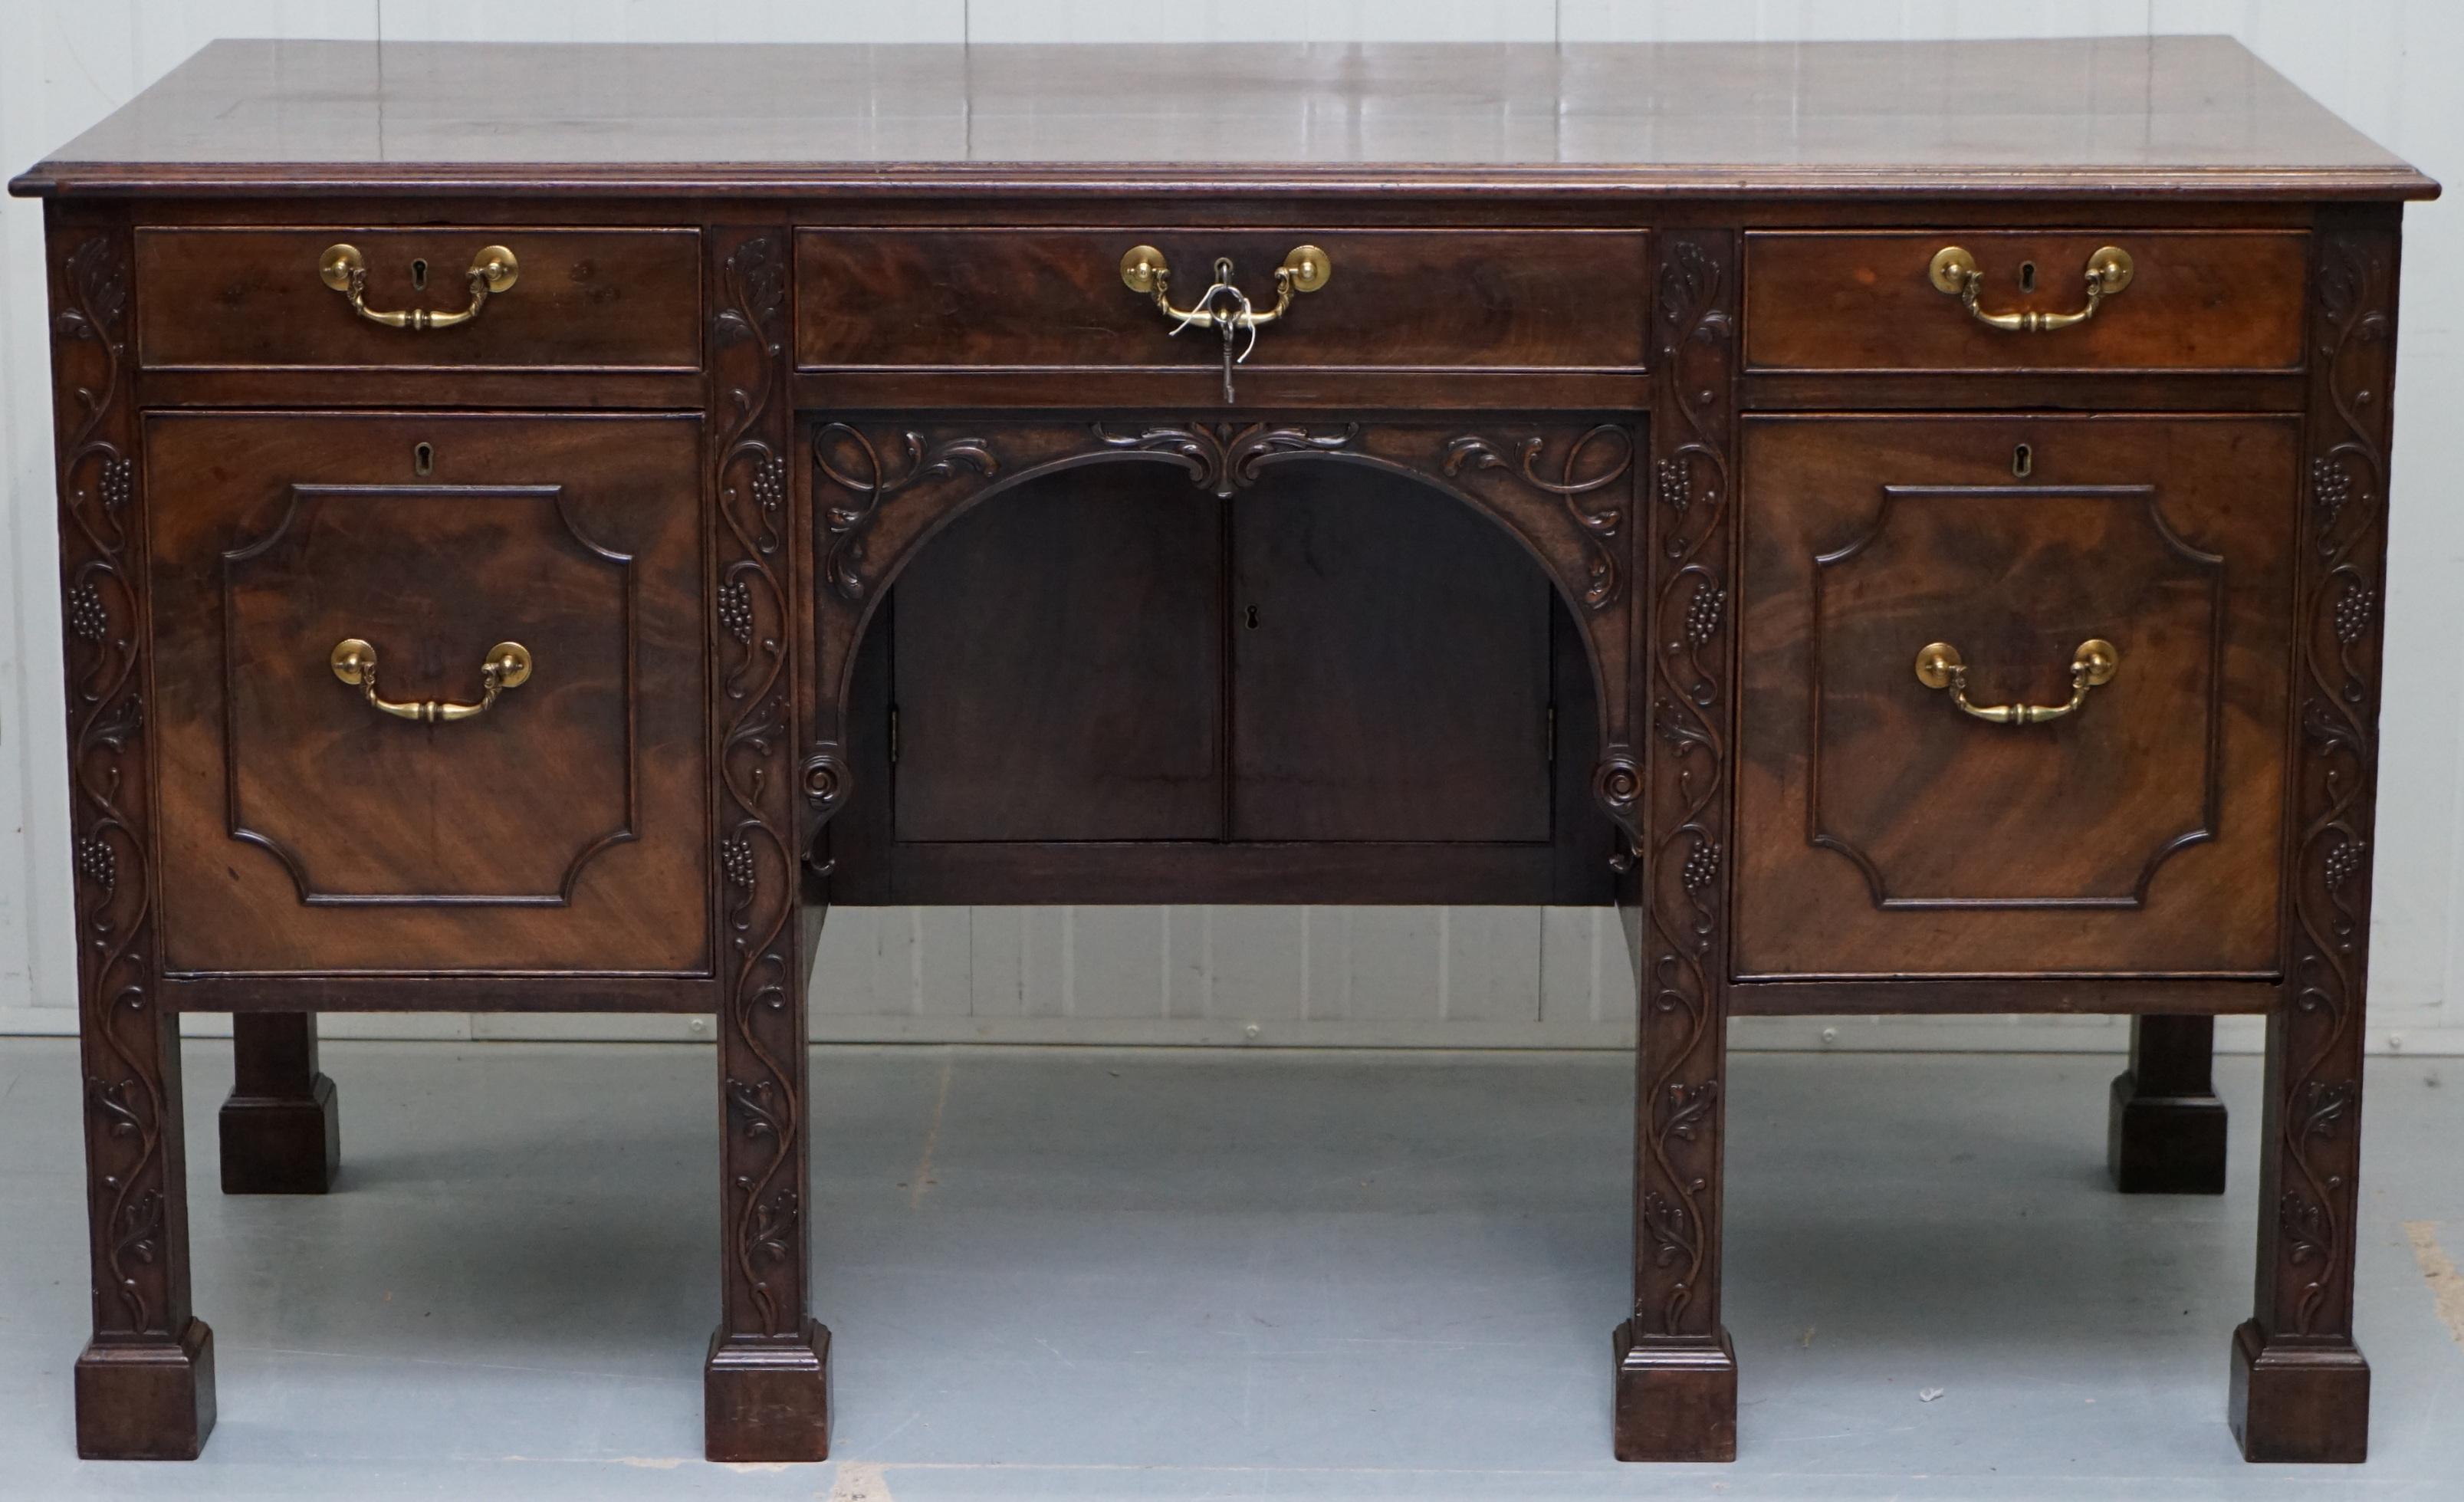 English Viscountess Boyd's Ince Castle Rare George III Hardwood Sideboard Chippendale For Sale